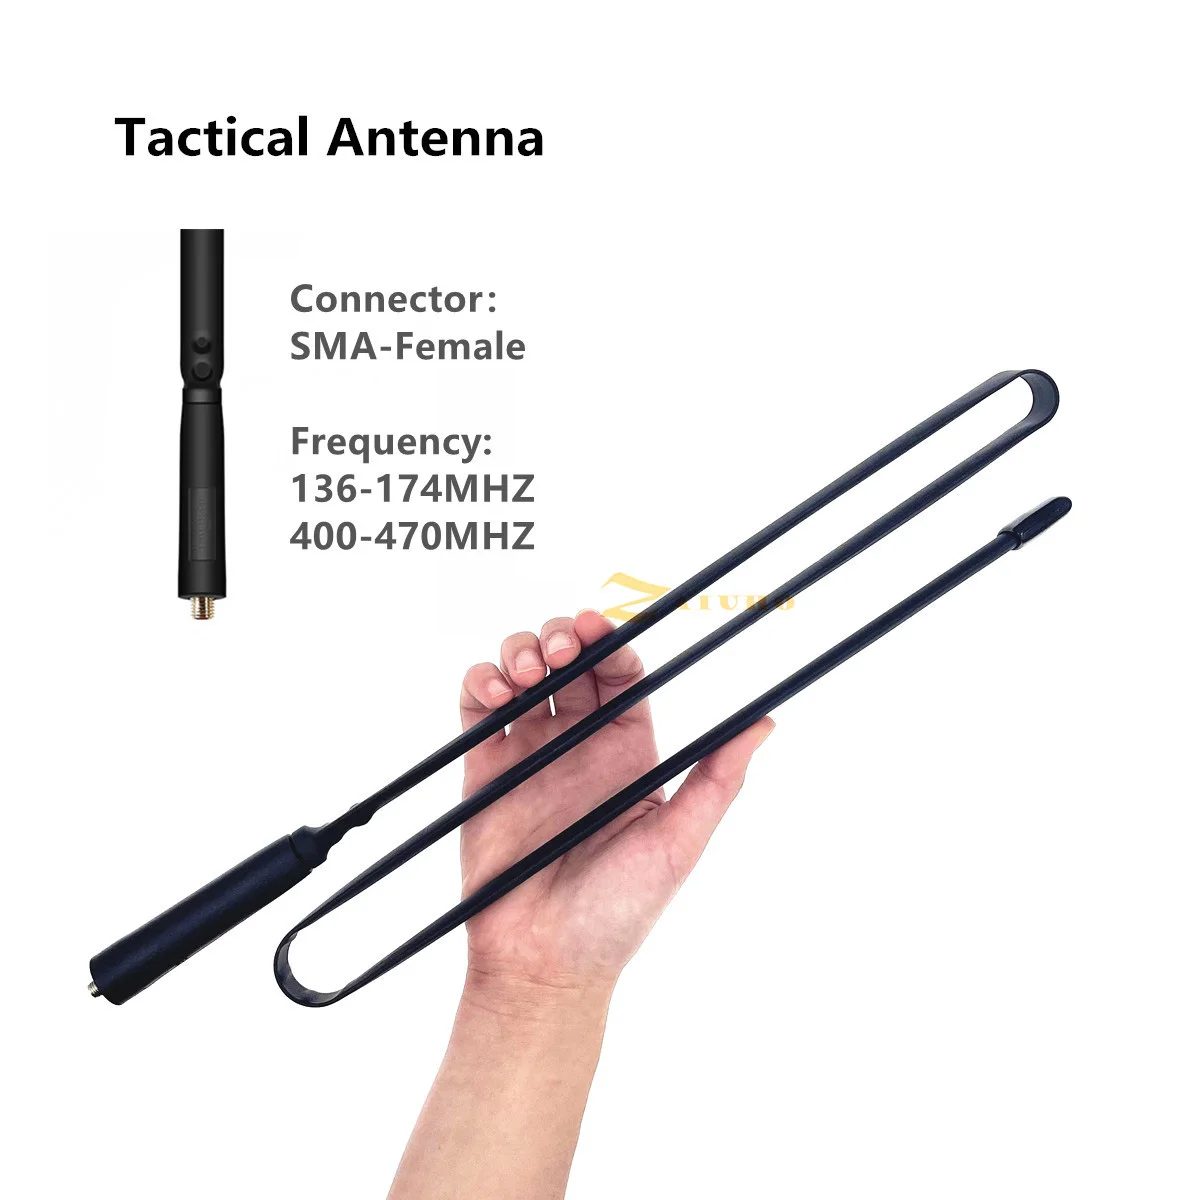 New Tactical SMA-F Foldable Antenna VHF UHF Walkie Talkie Baofeng UV-5R 82 9R Plus antenna BF-888S For CS Hunting  Fighting